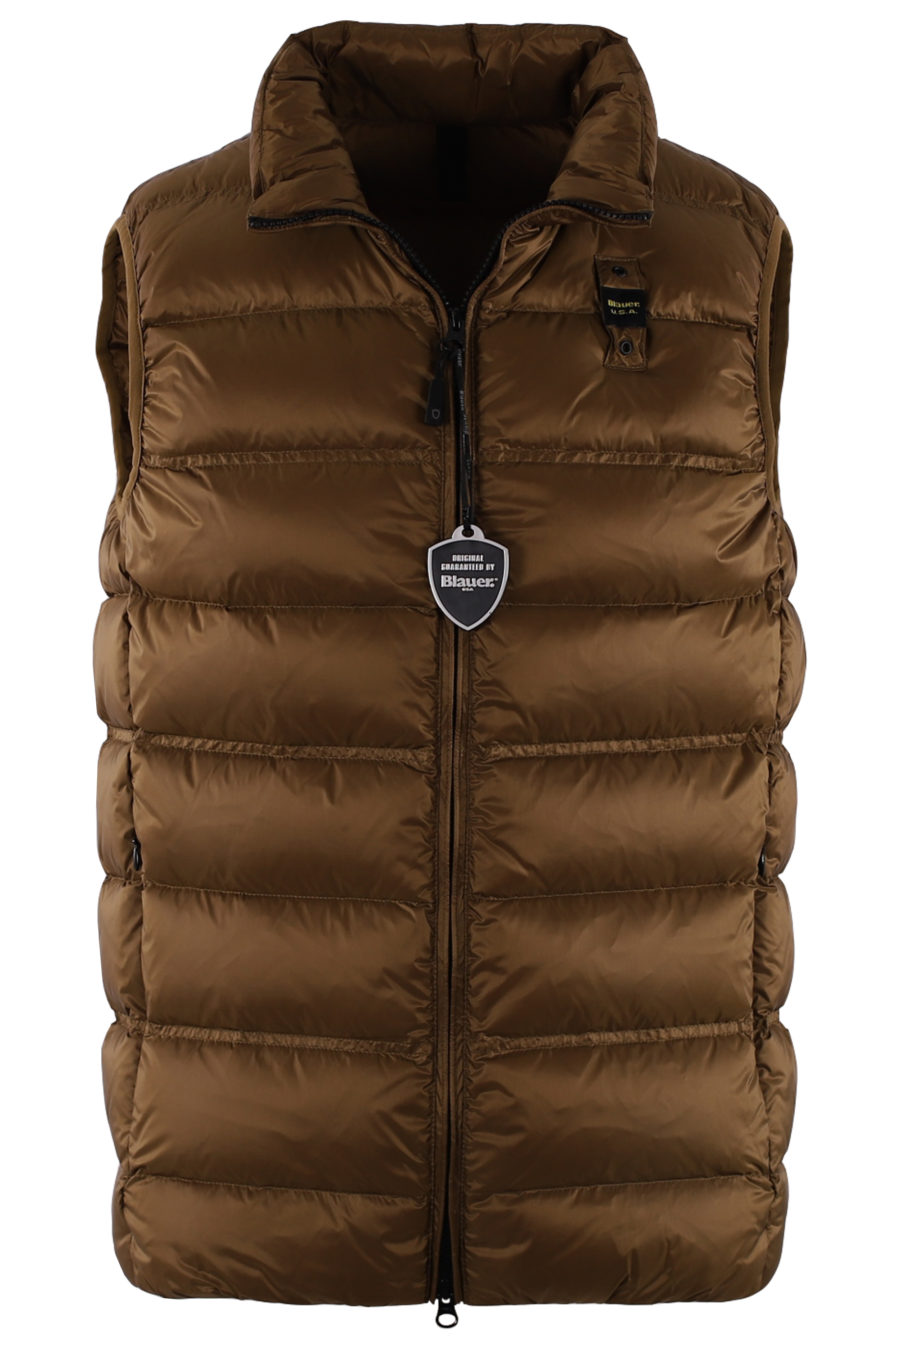 Brown quilted waistcoat - IMG 9415